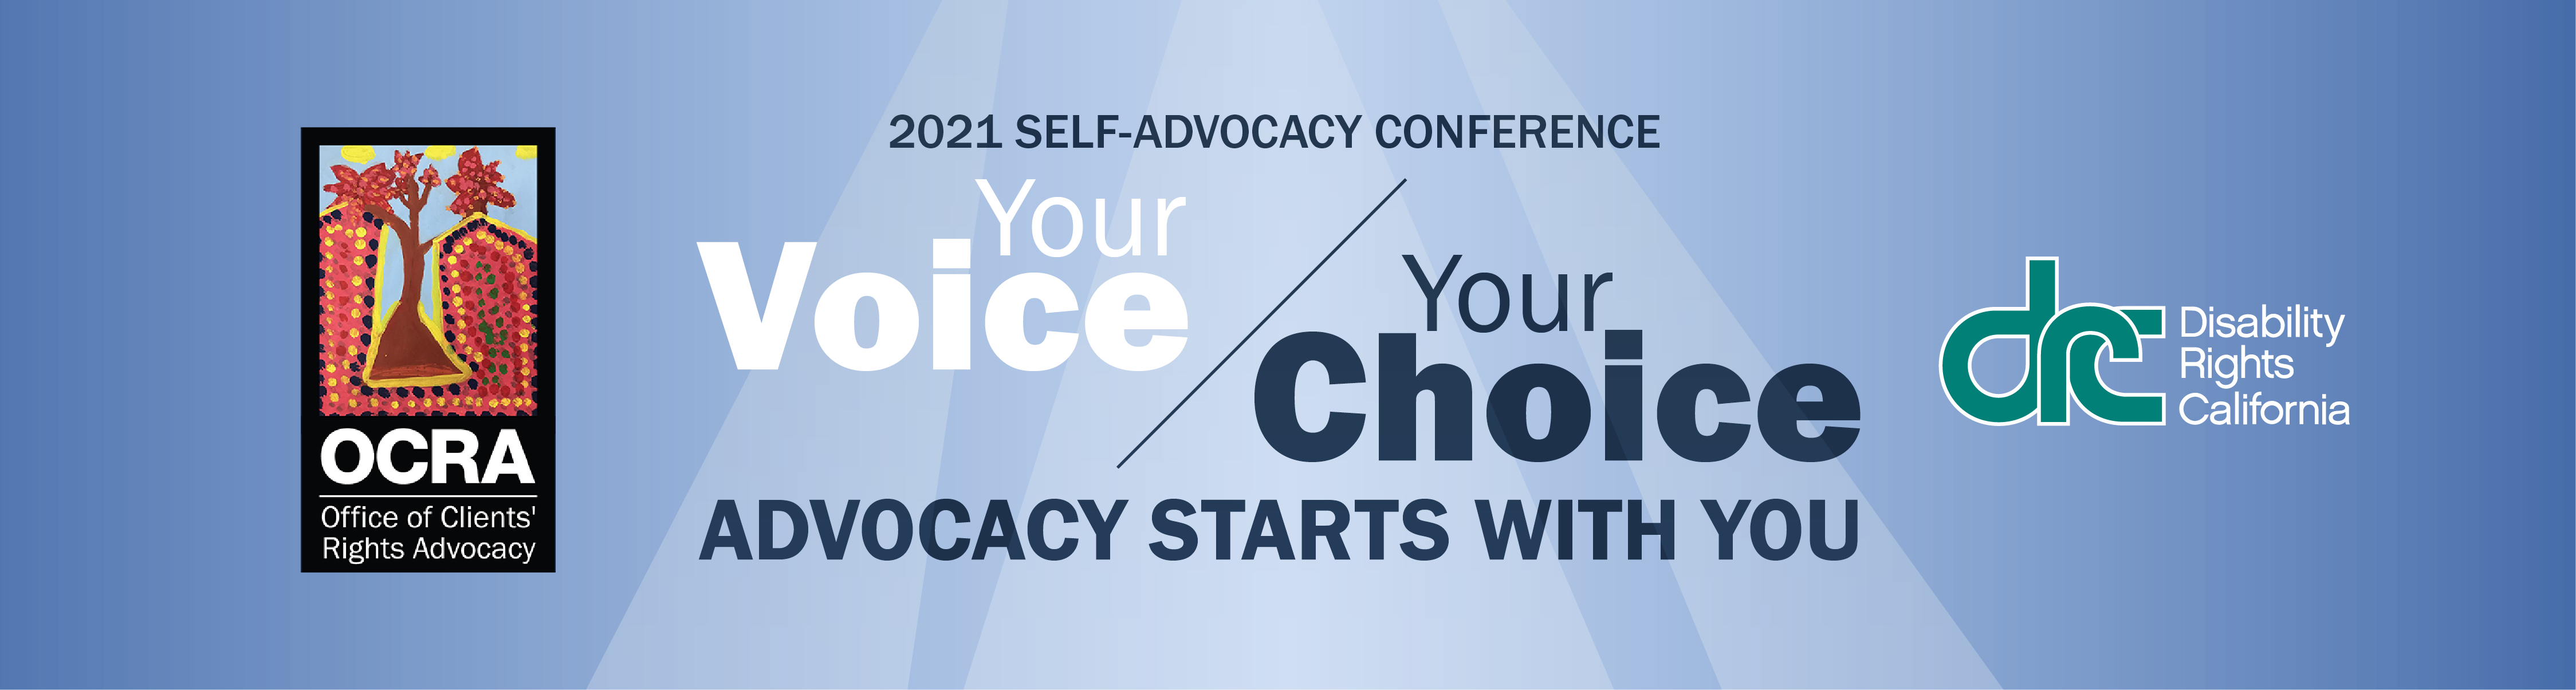 2021 Self-Advocacy Conference. Your Voice / Your Choice. Advocacy Starts with you.